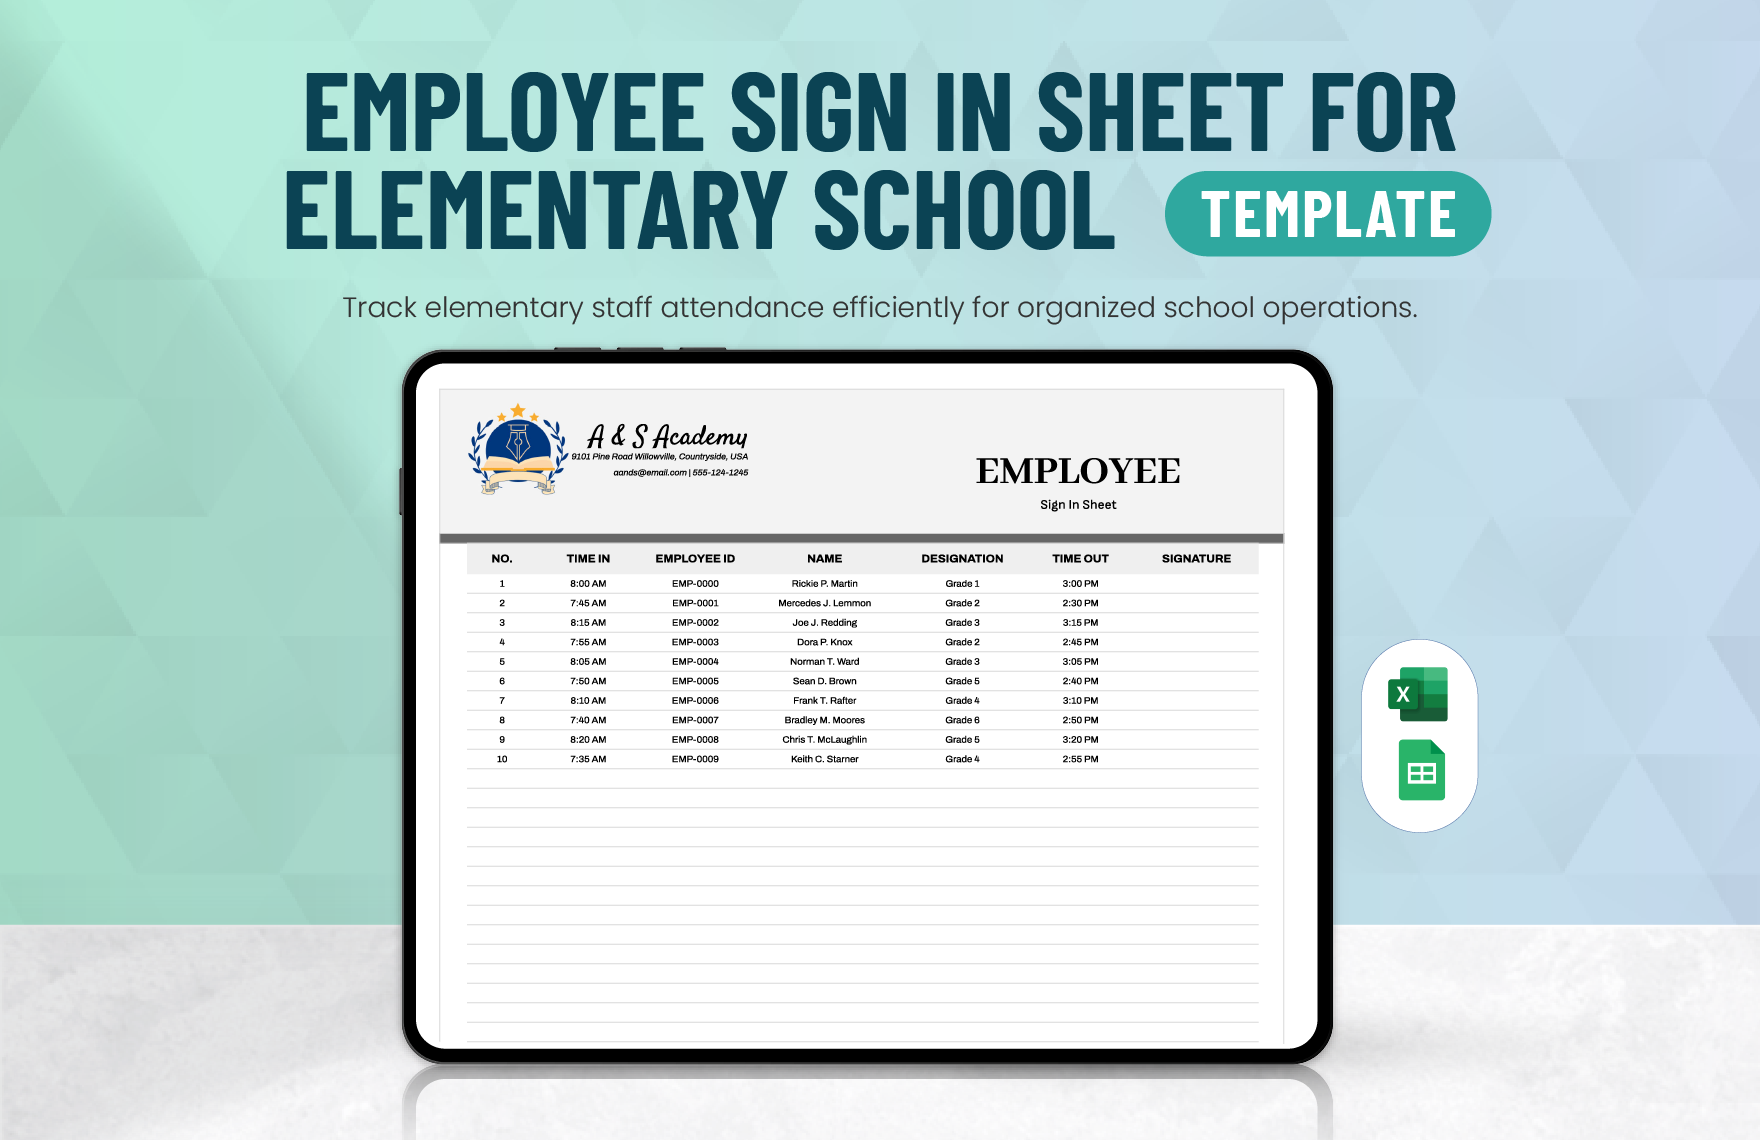 Employee Sign in Sheet For Elementary School Template